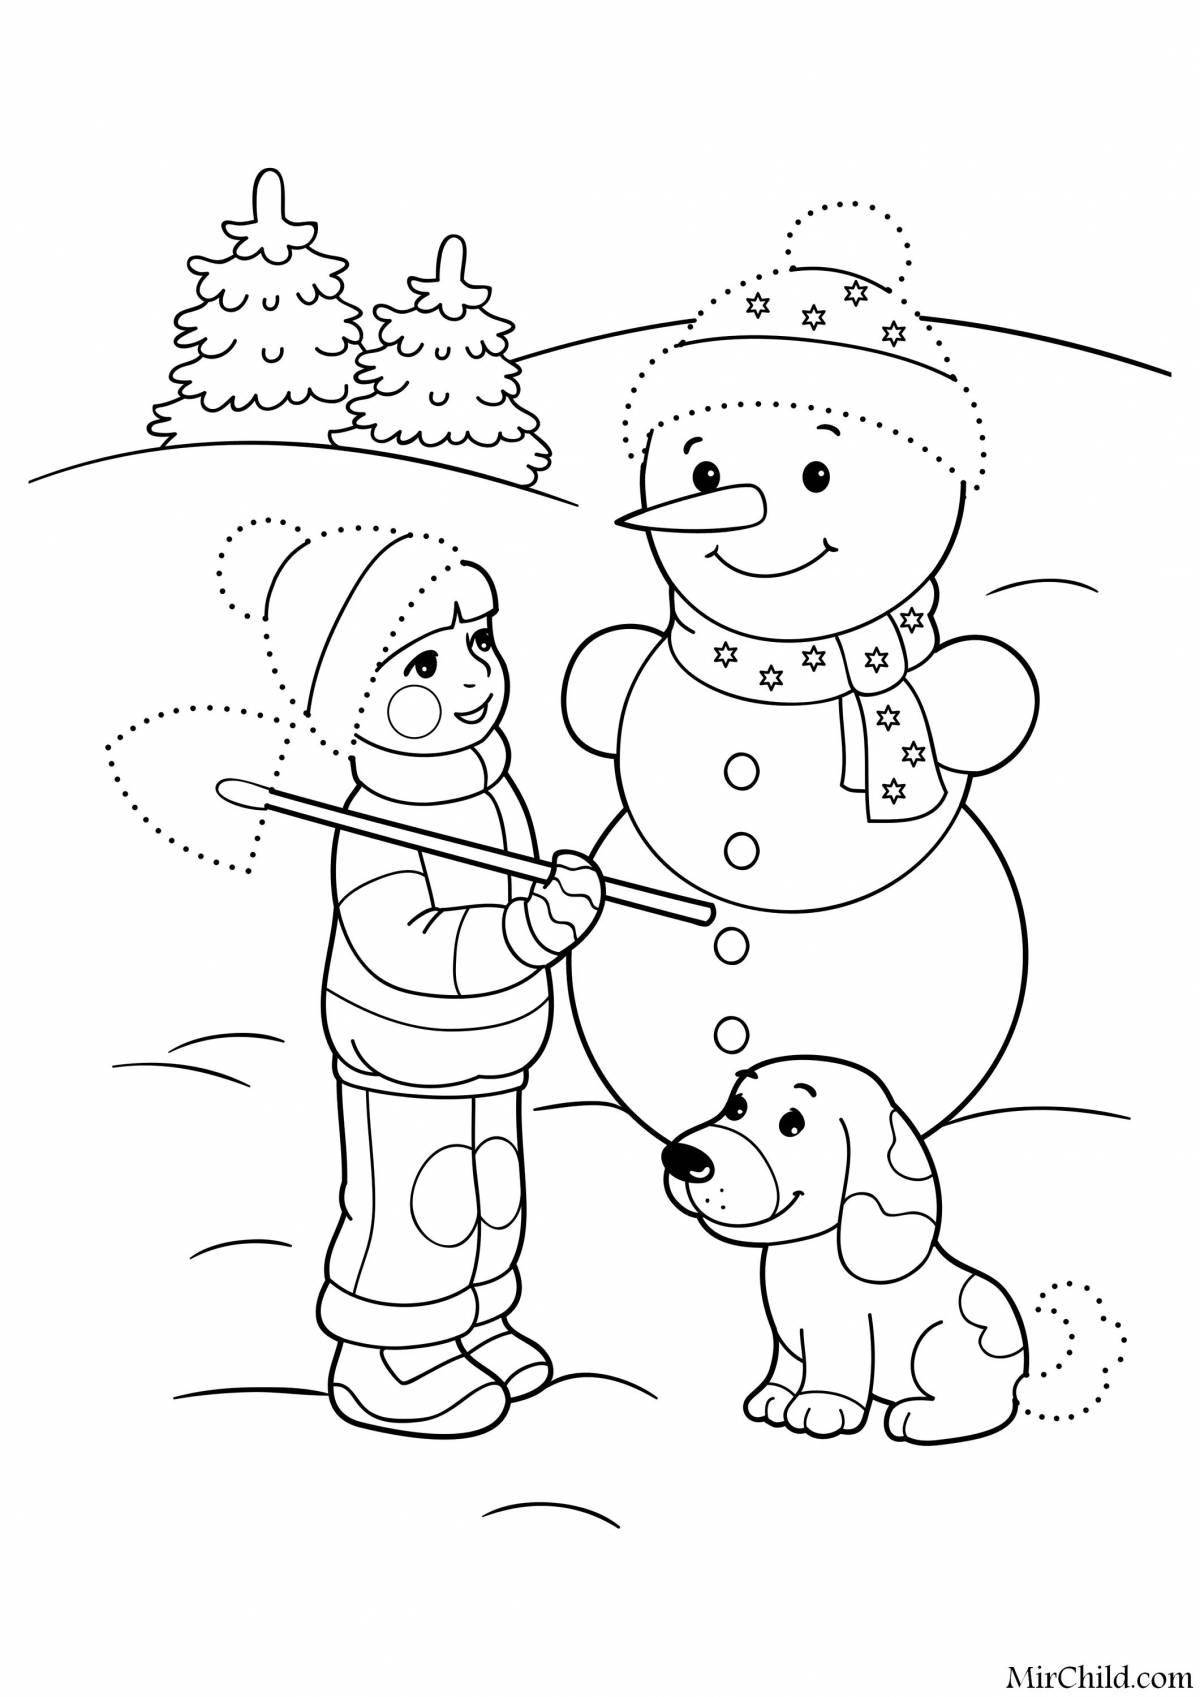 Glowing winter coloring book for children 8 years old